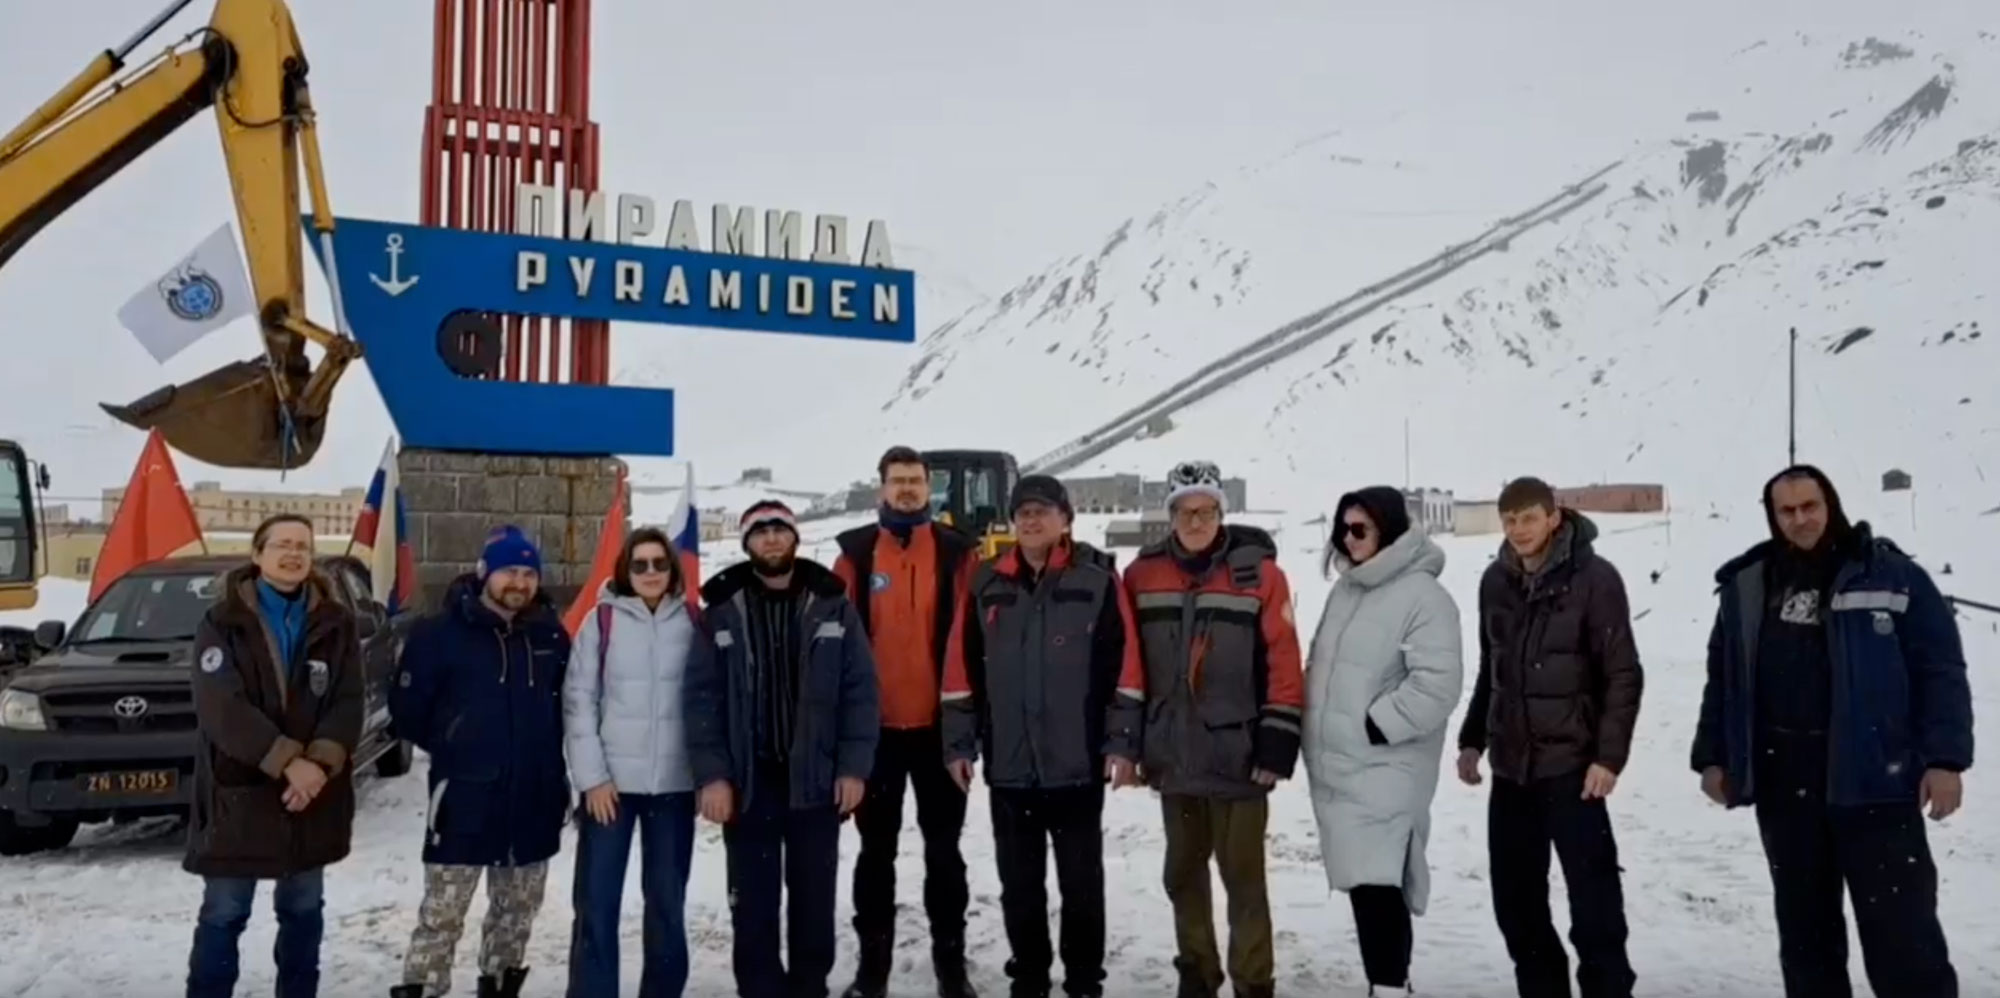 Locals participating in the 9th of May parade in Pyramiden. Screenshot of video by Trust Arktikugol